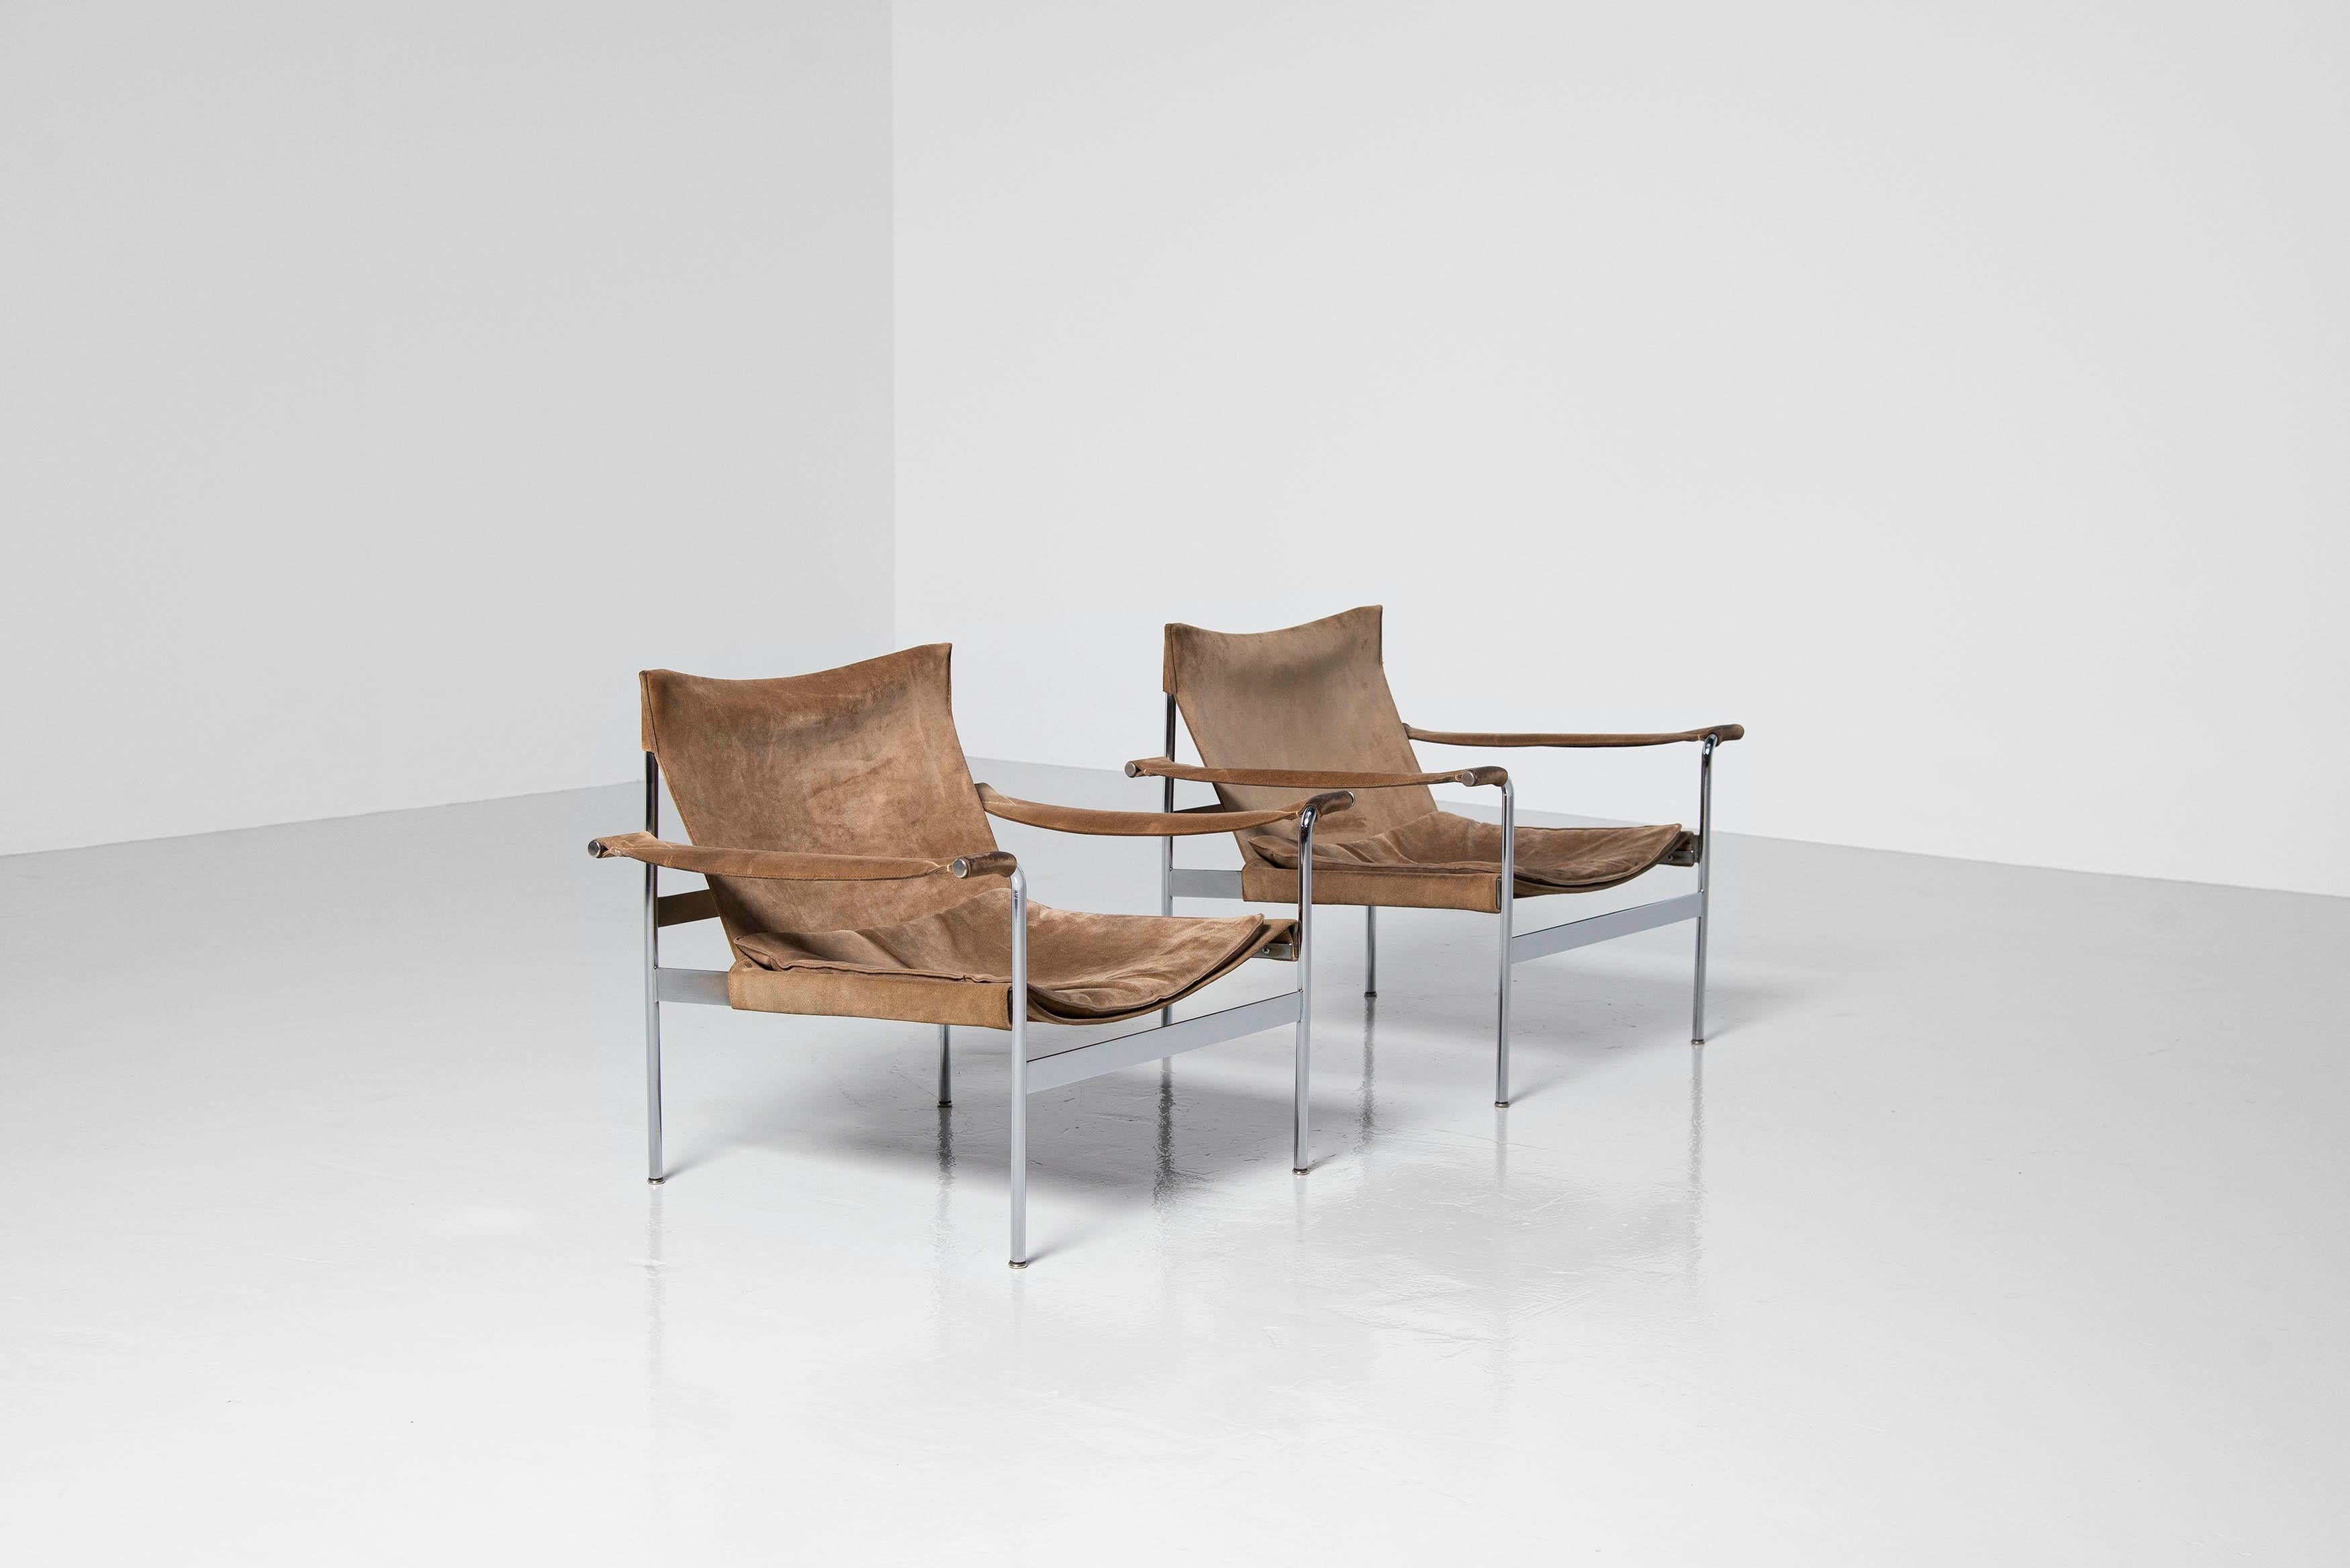 Stunning pair of lounge chairs model D99 designed by Hans Könecke and manufactured by Tecta, Germany 1965. Hans Könecke was the founder of Tecta, which was one of the leading Germany furniture producers. He was head of the design department at Tecta